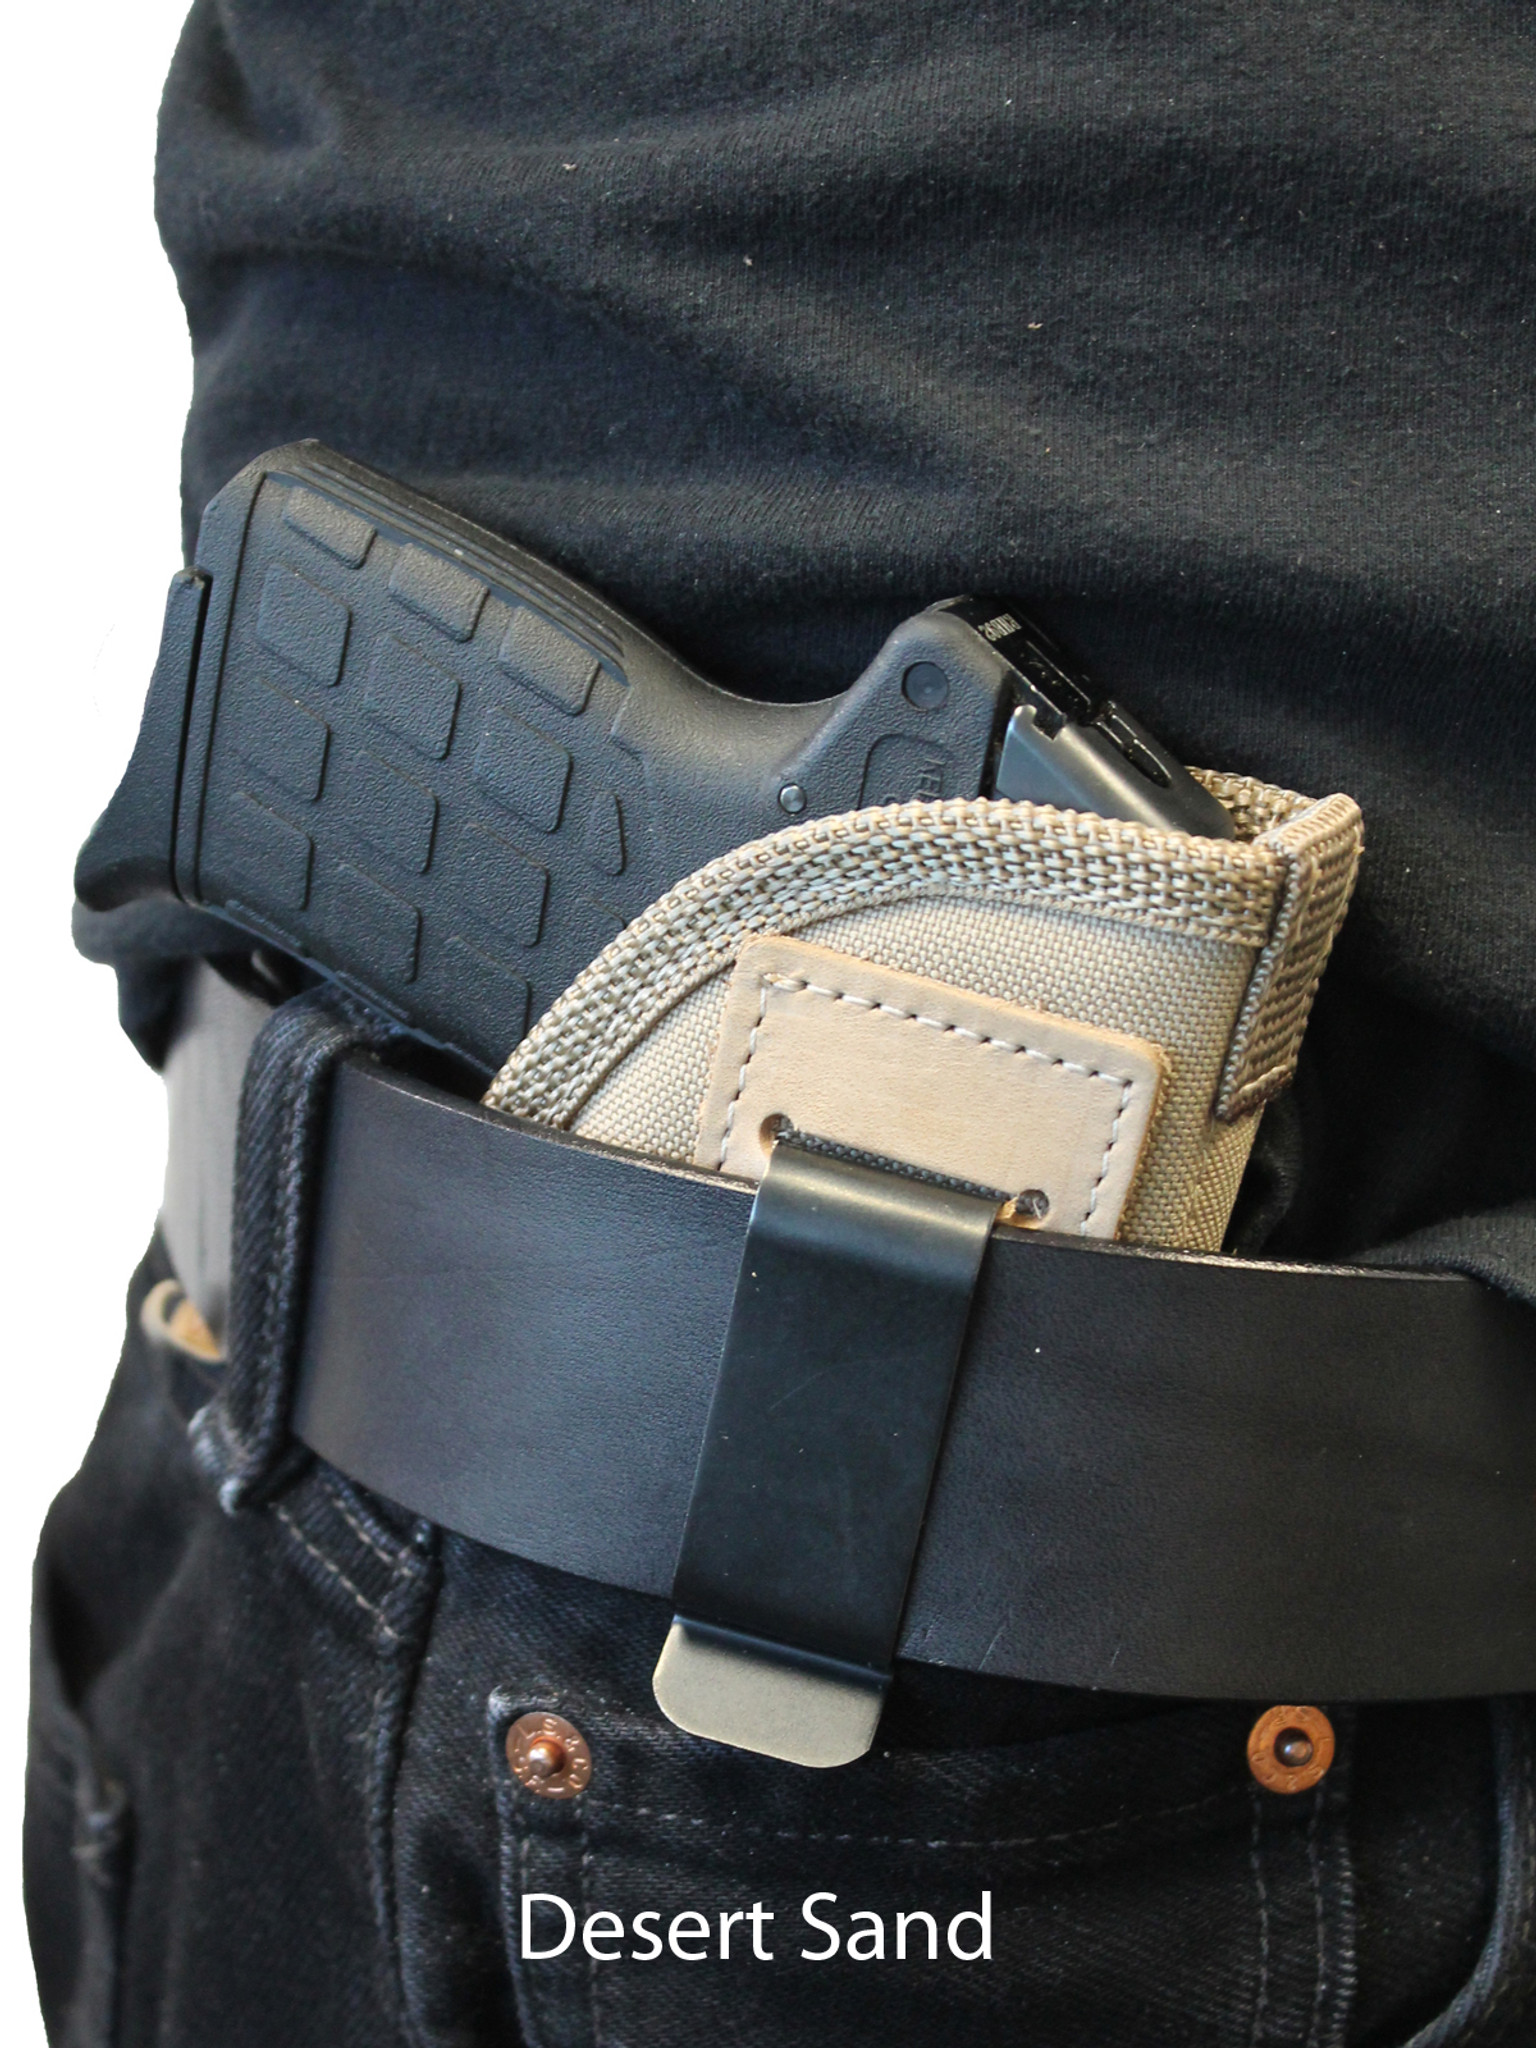 Foliage Conceal Carry Waist Pack